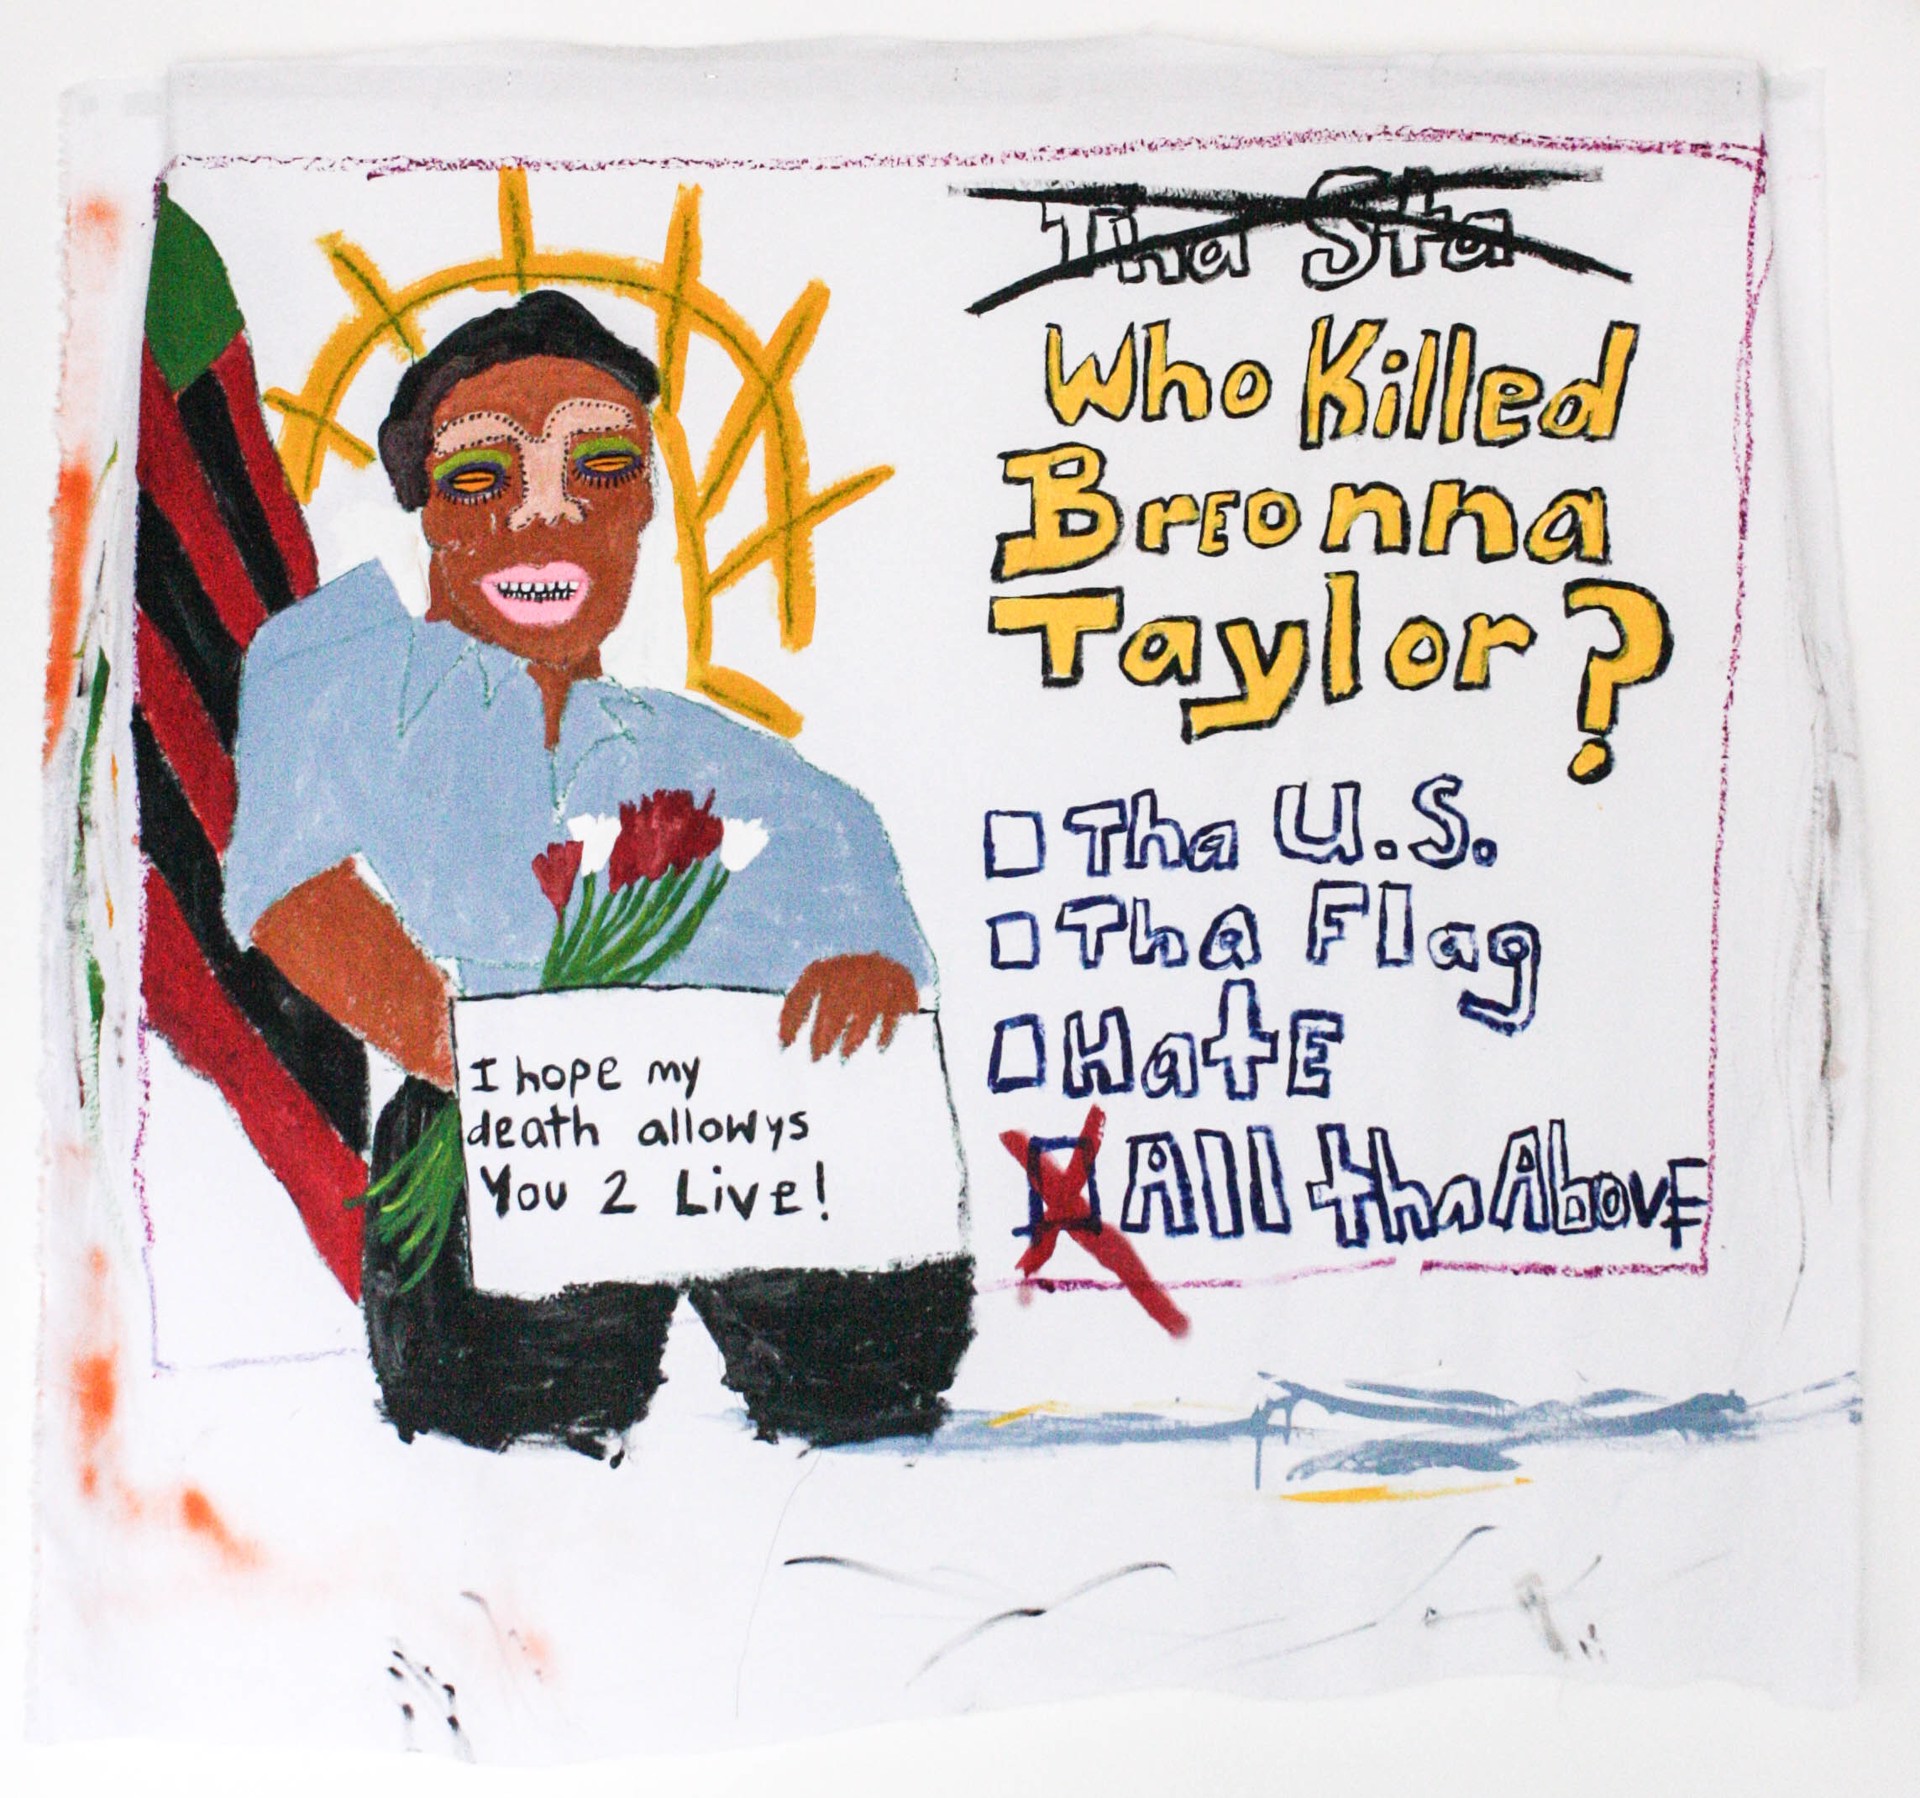 Justice for Breonna Taylor by Marlos E'van